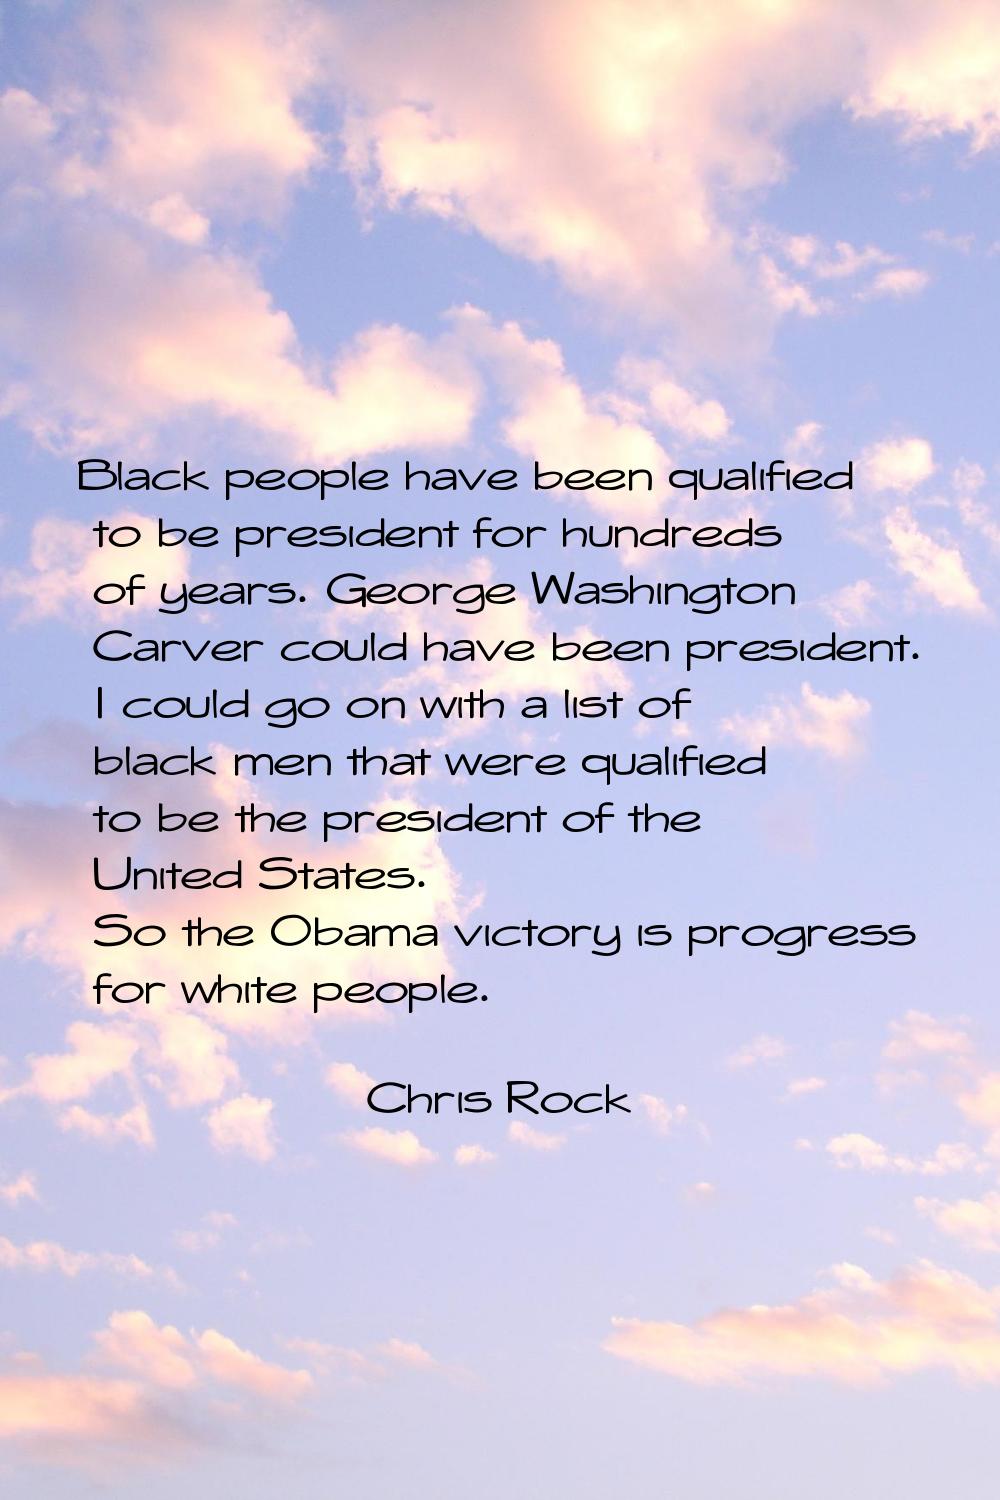 Black people have been qualified to be president for hundreds of years. George Washington Carver co